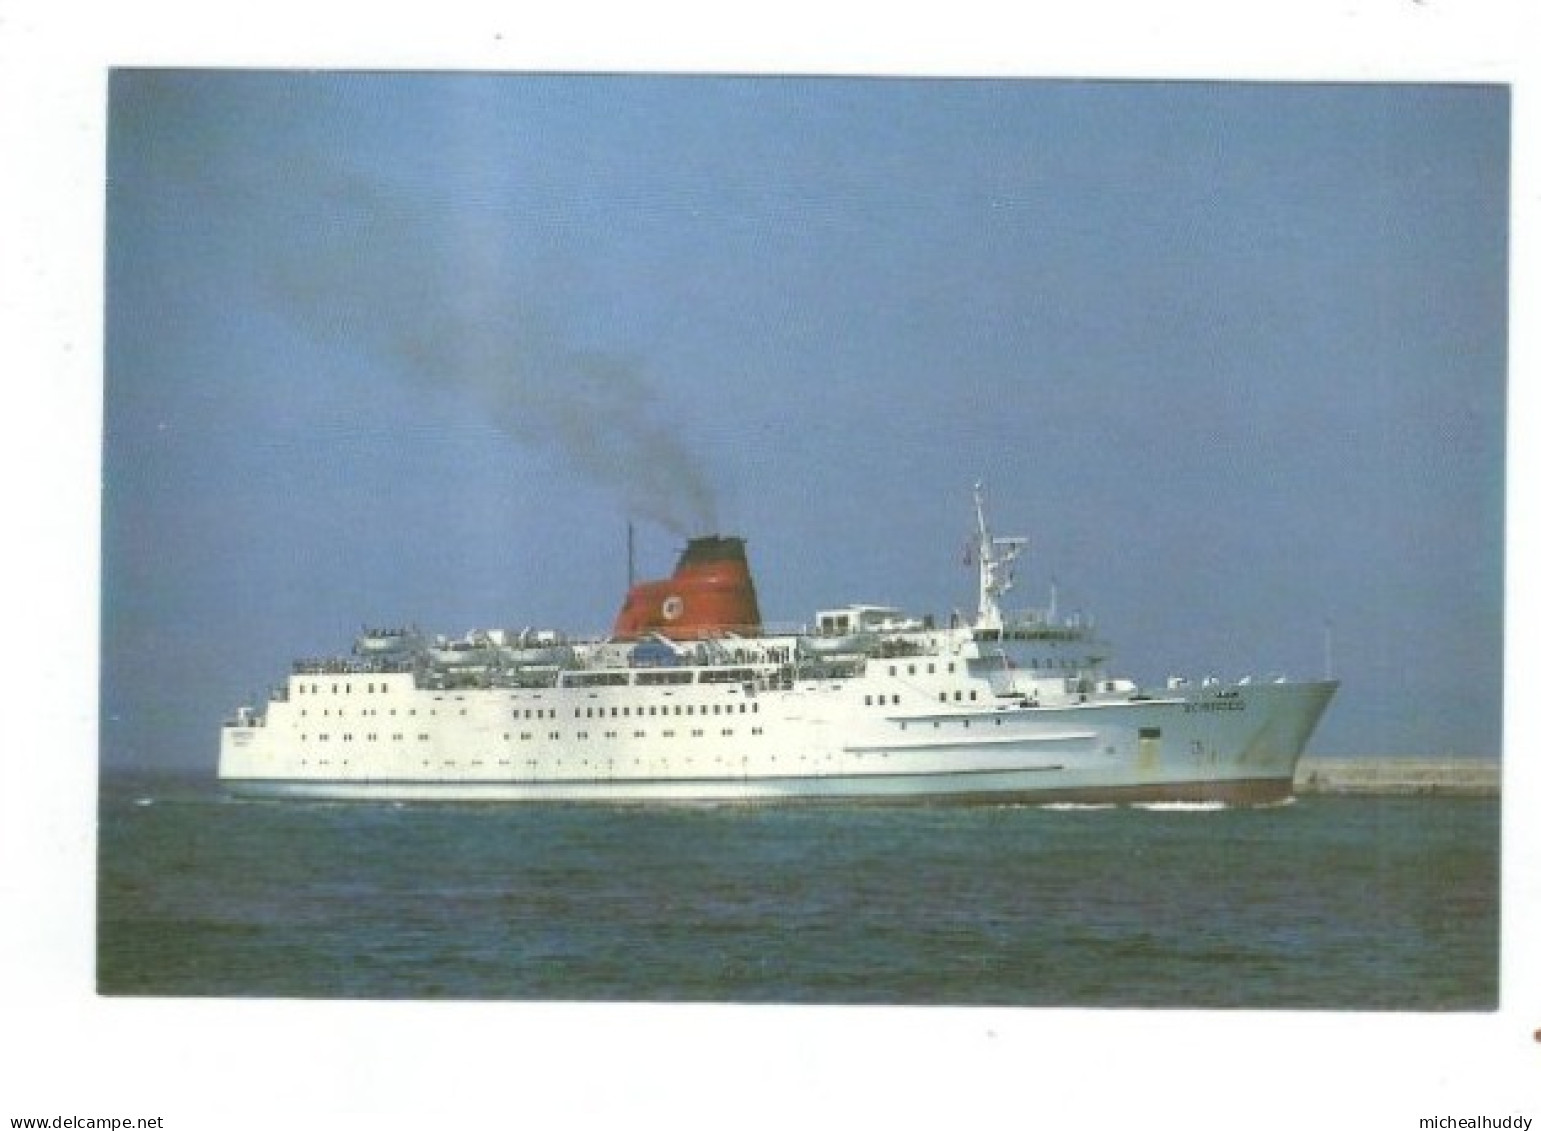 POSTCARD   SHIPPING  FERRY  IMARSEILLE /GENOA SERVICE   SCIRROCCO PUBL BY RAMSEY POSTCARDS - Hausboote